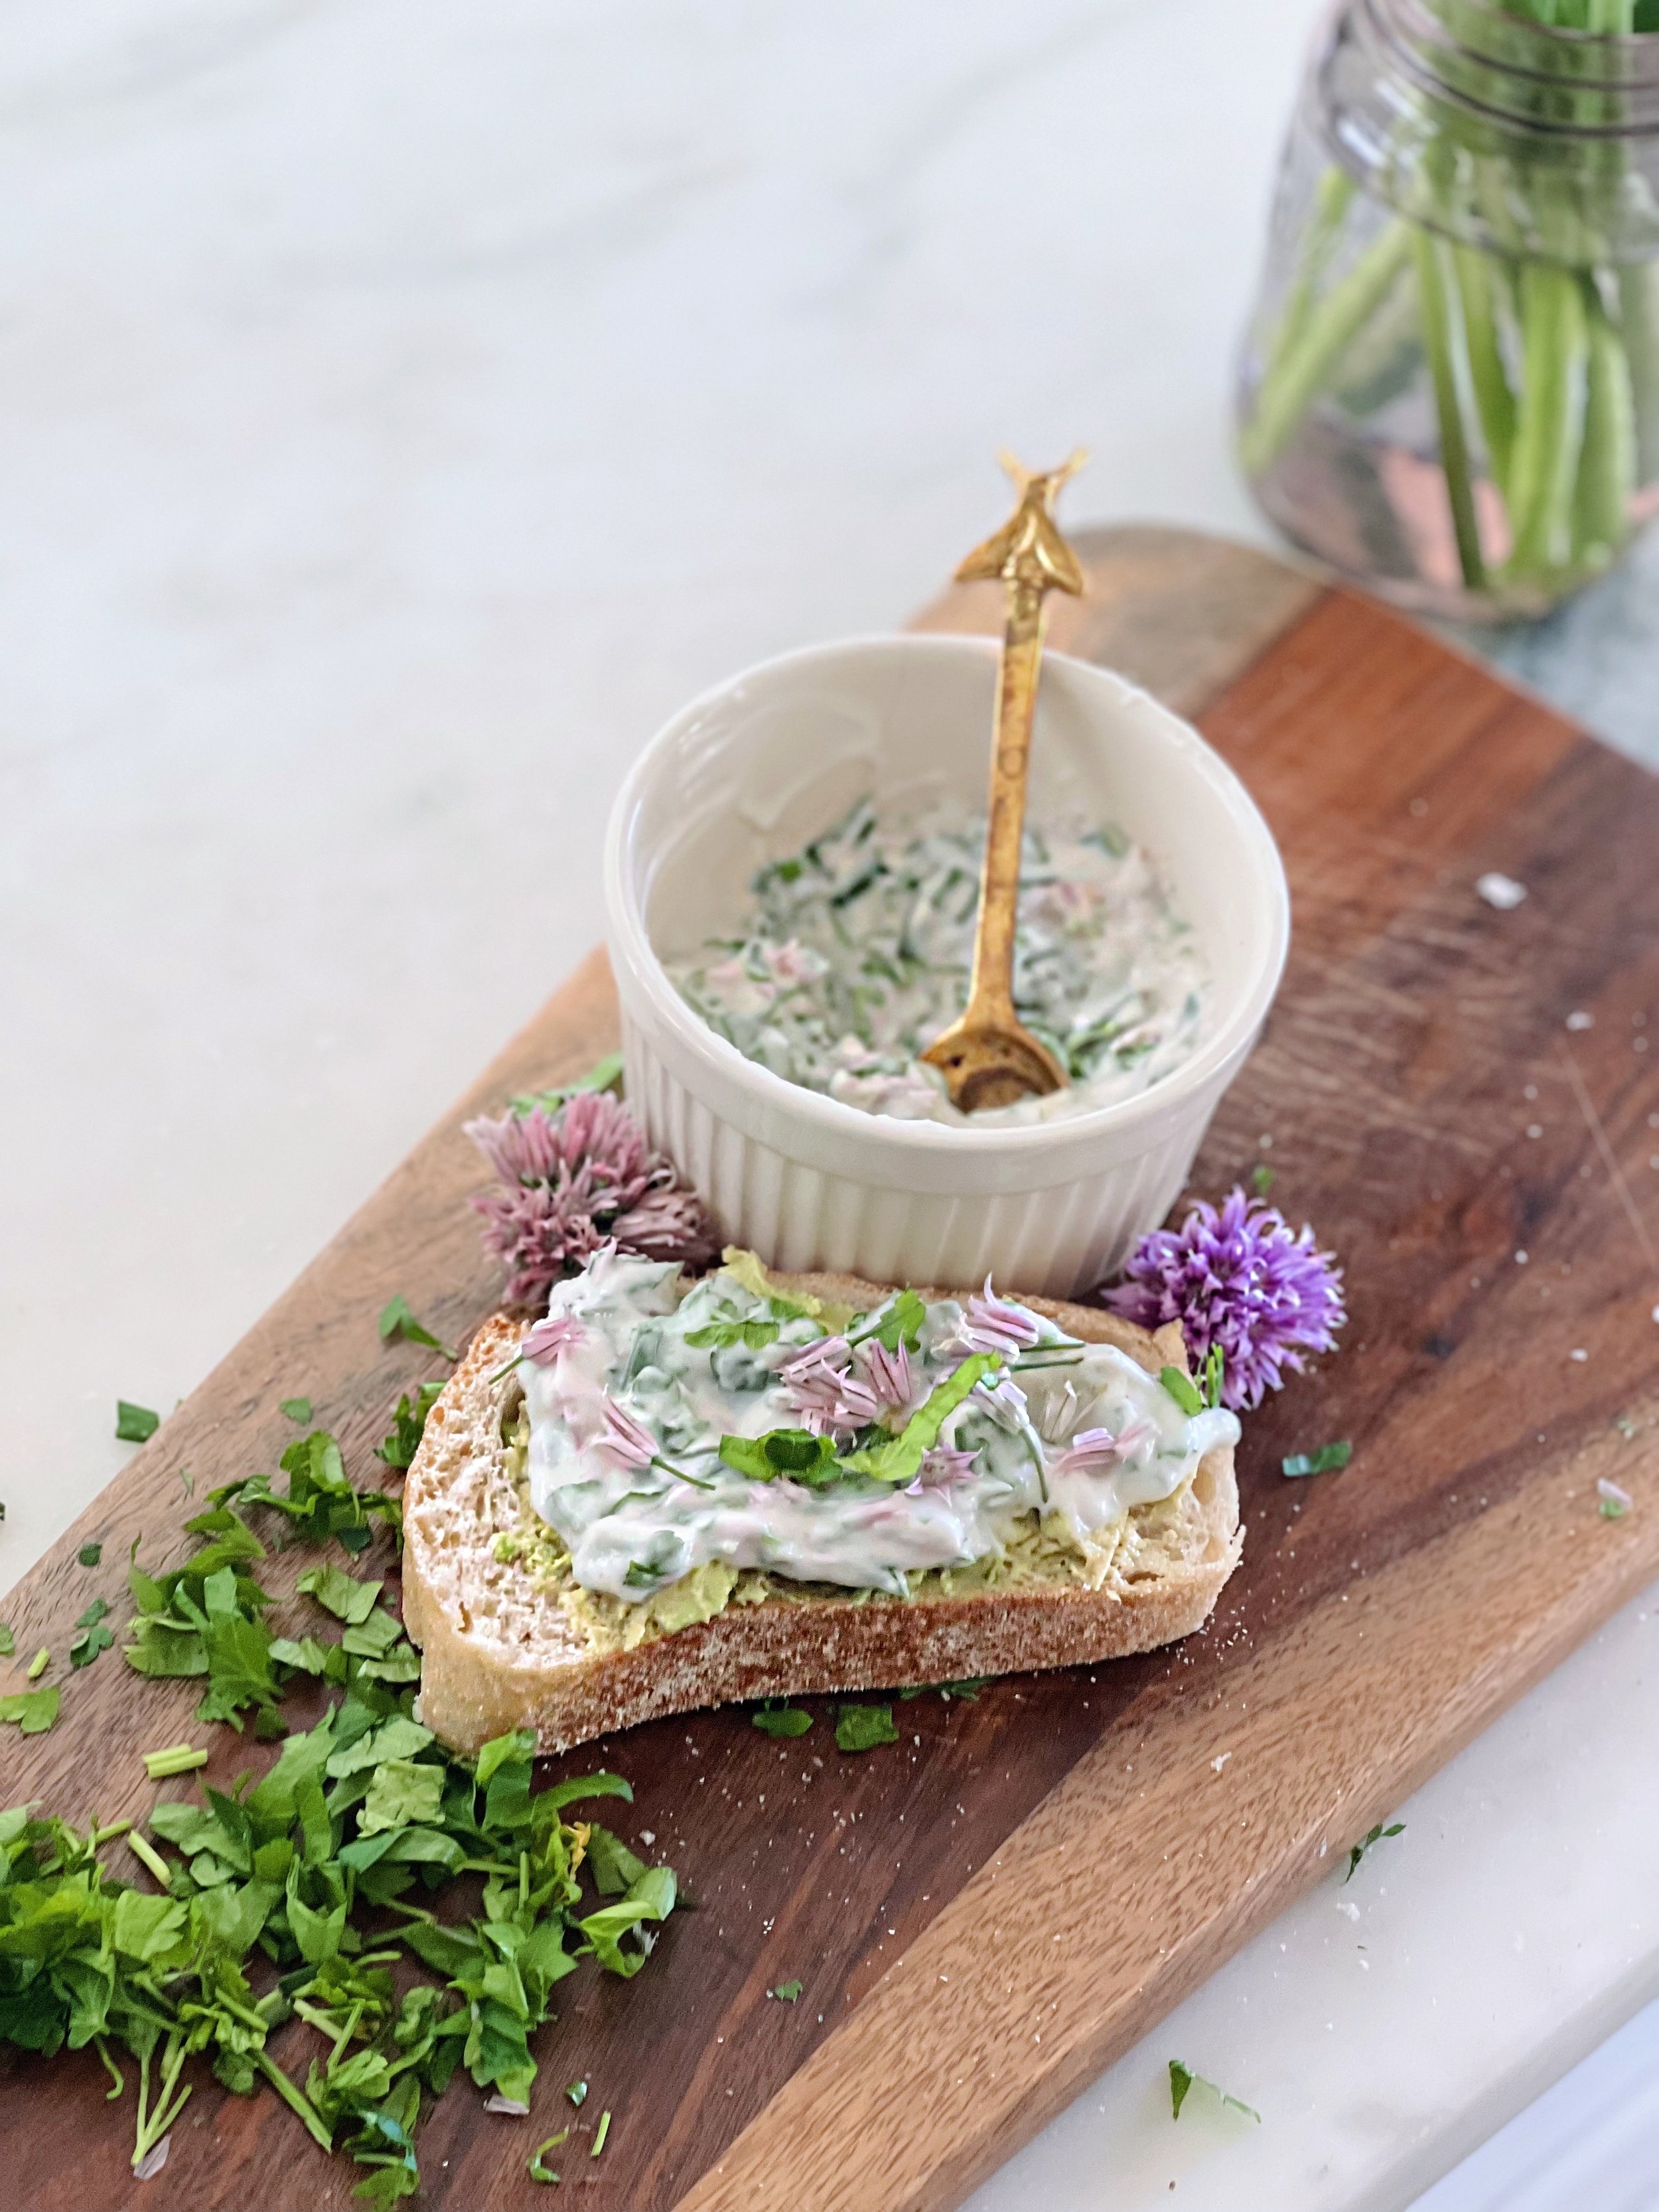 Chive Blossom Dip